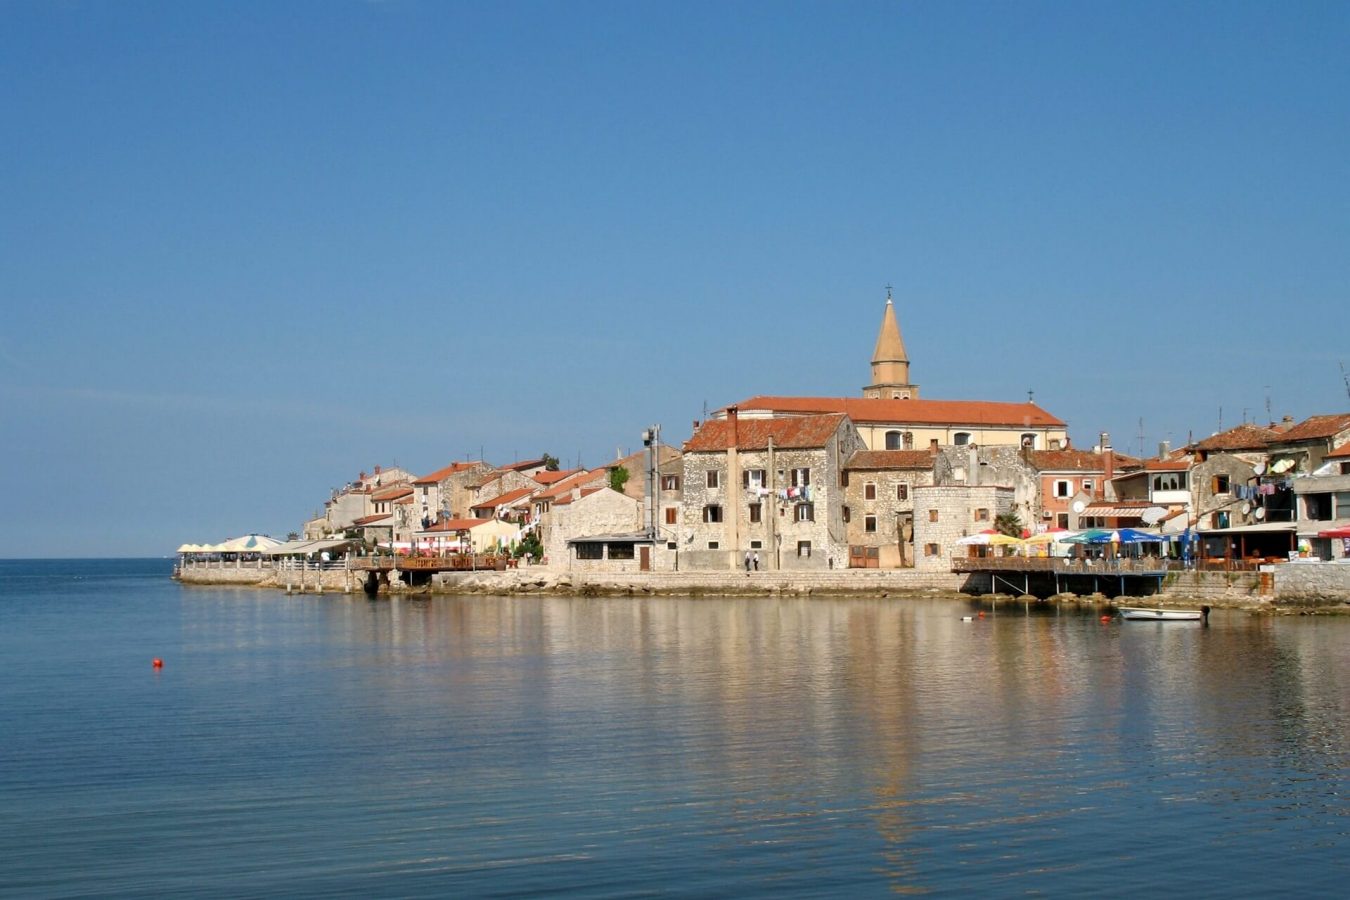 Holiday in Umag